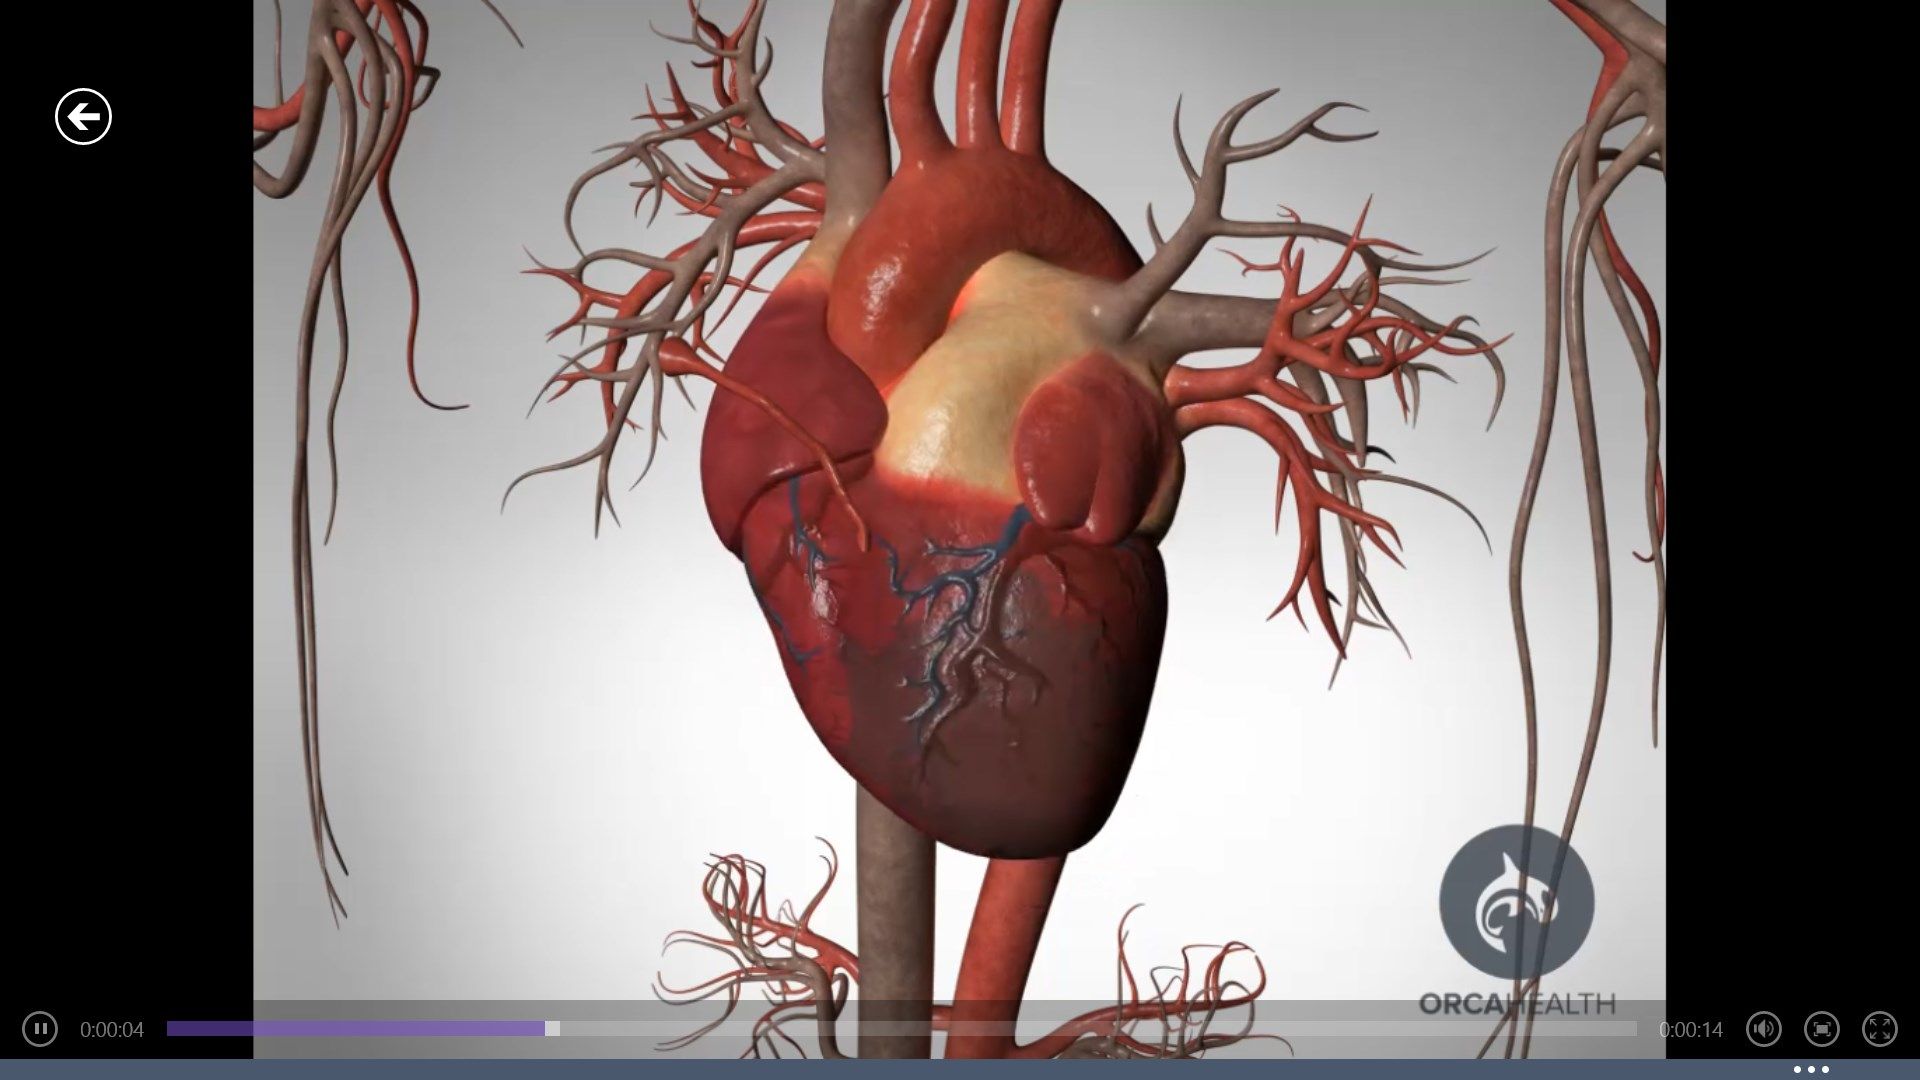 Beautiful videos illustrating common conditions and procedures